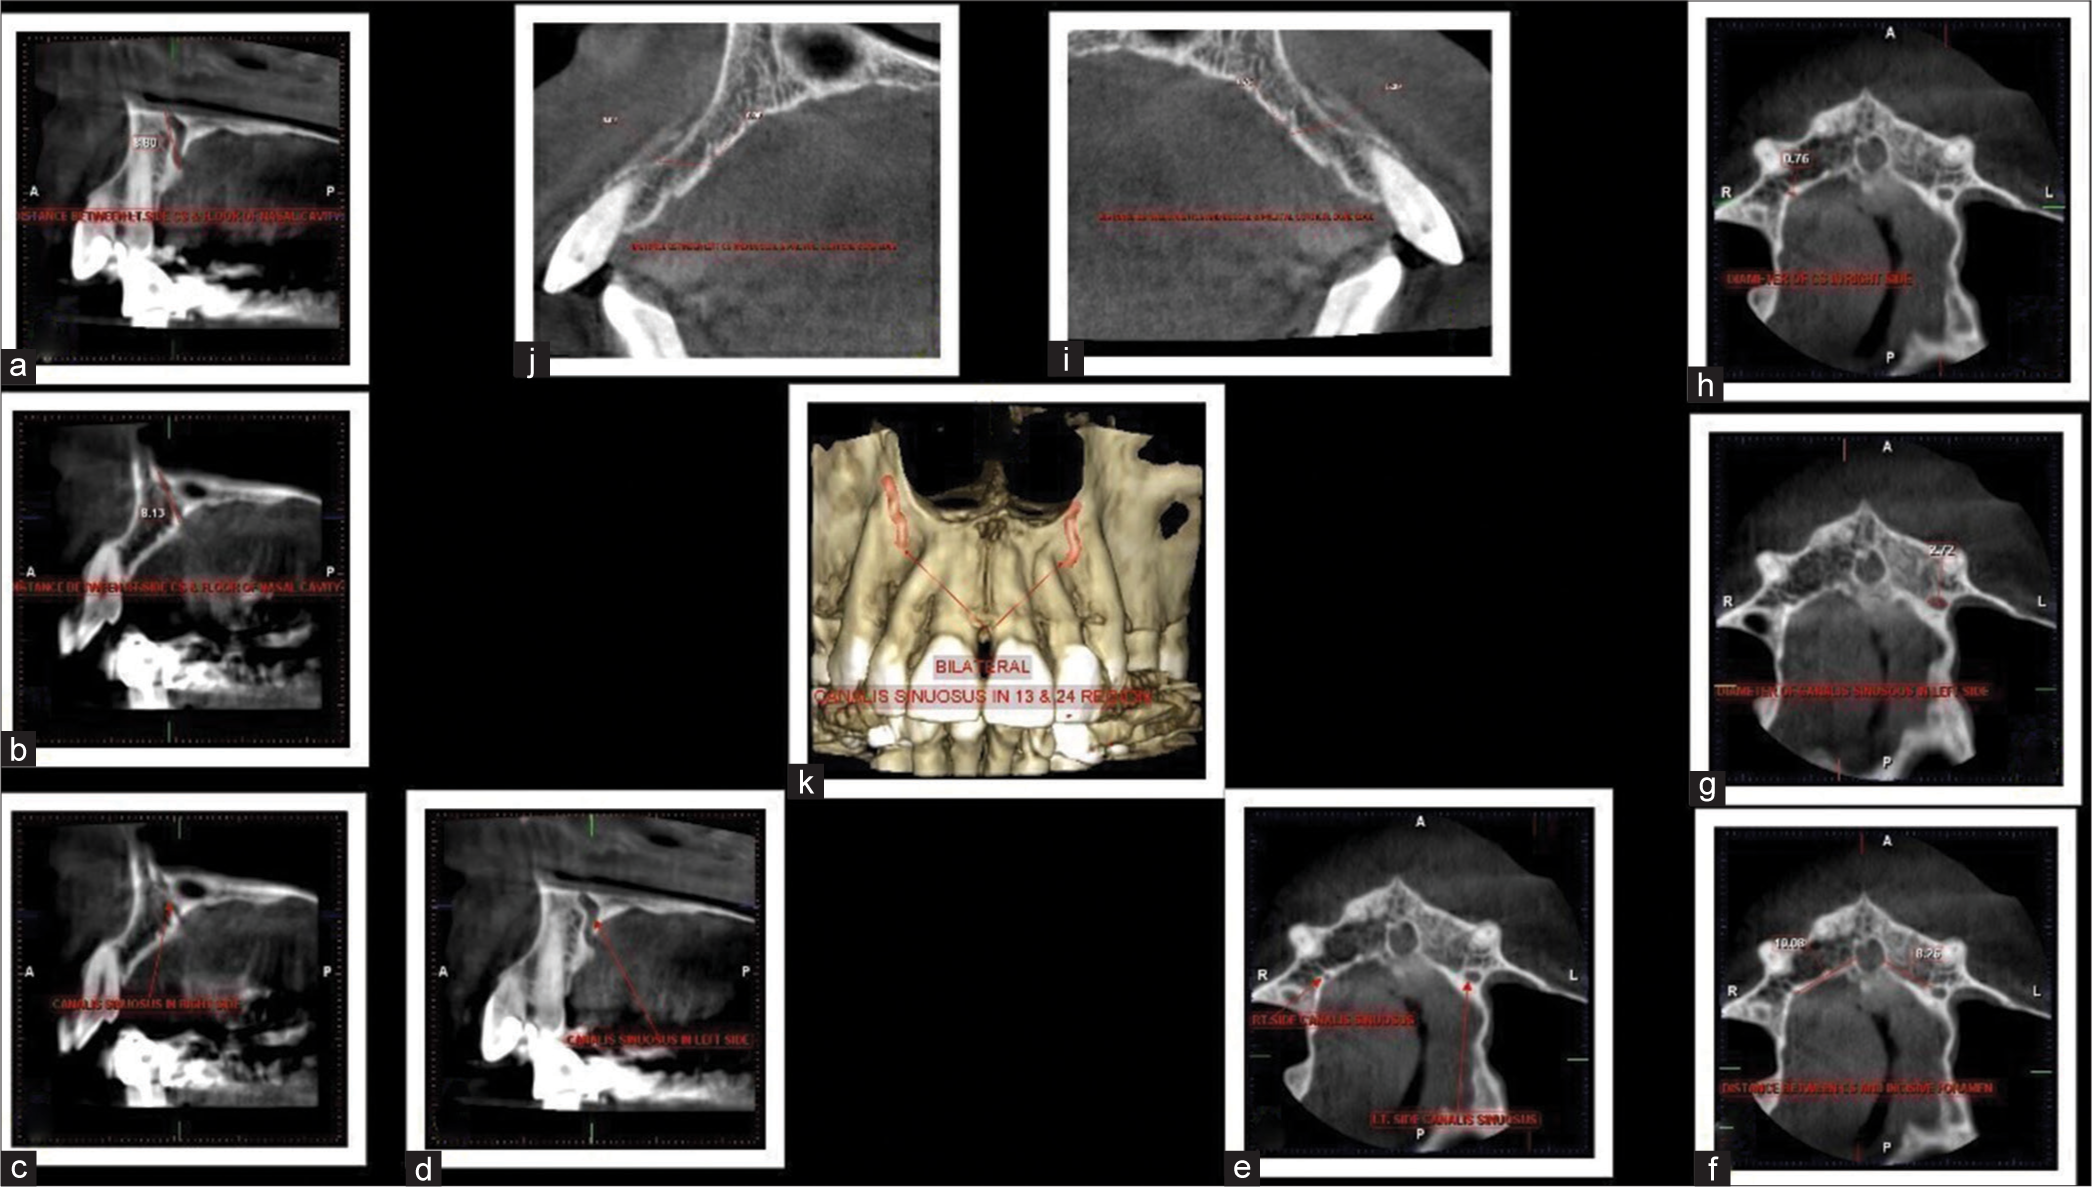 Assessment of canalis sinuosus, rare anatomical structure using cone-beam computed tomography: A prospective study